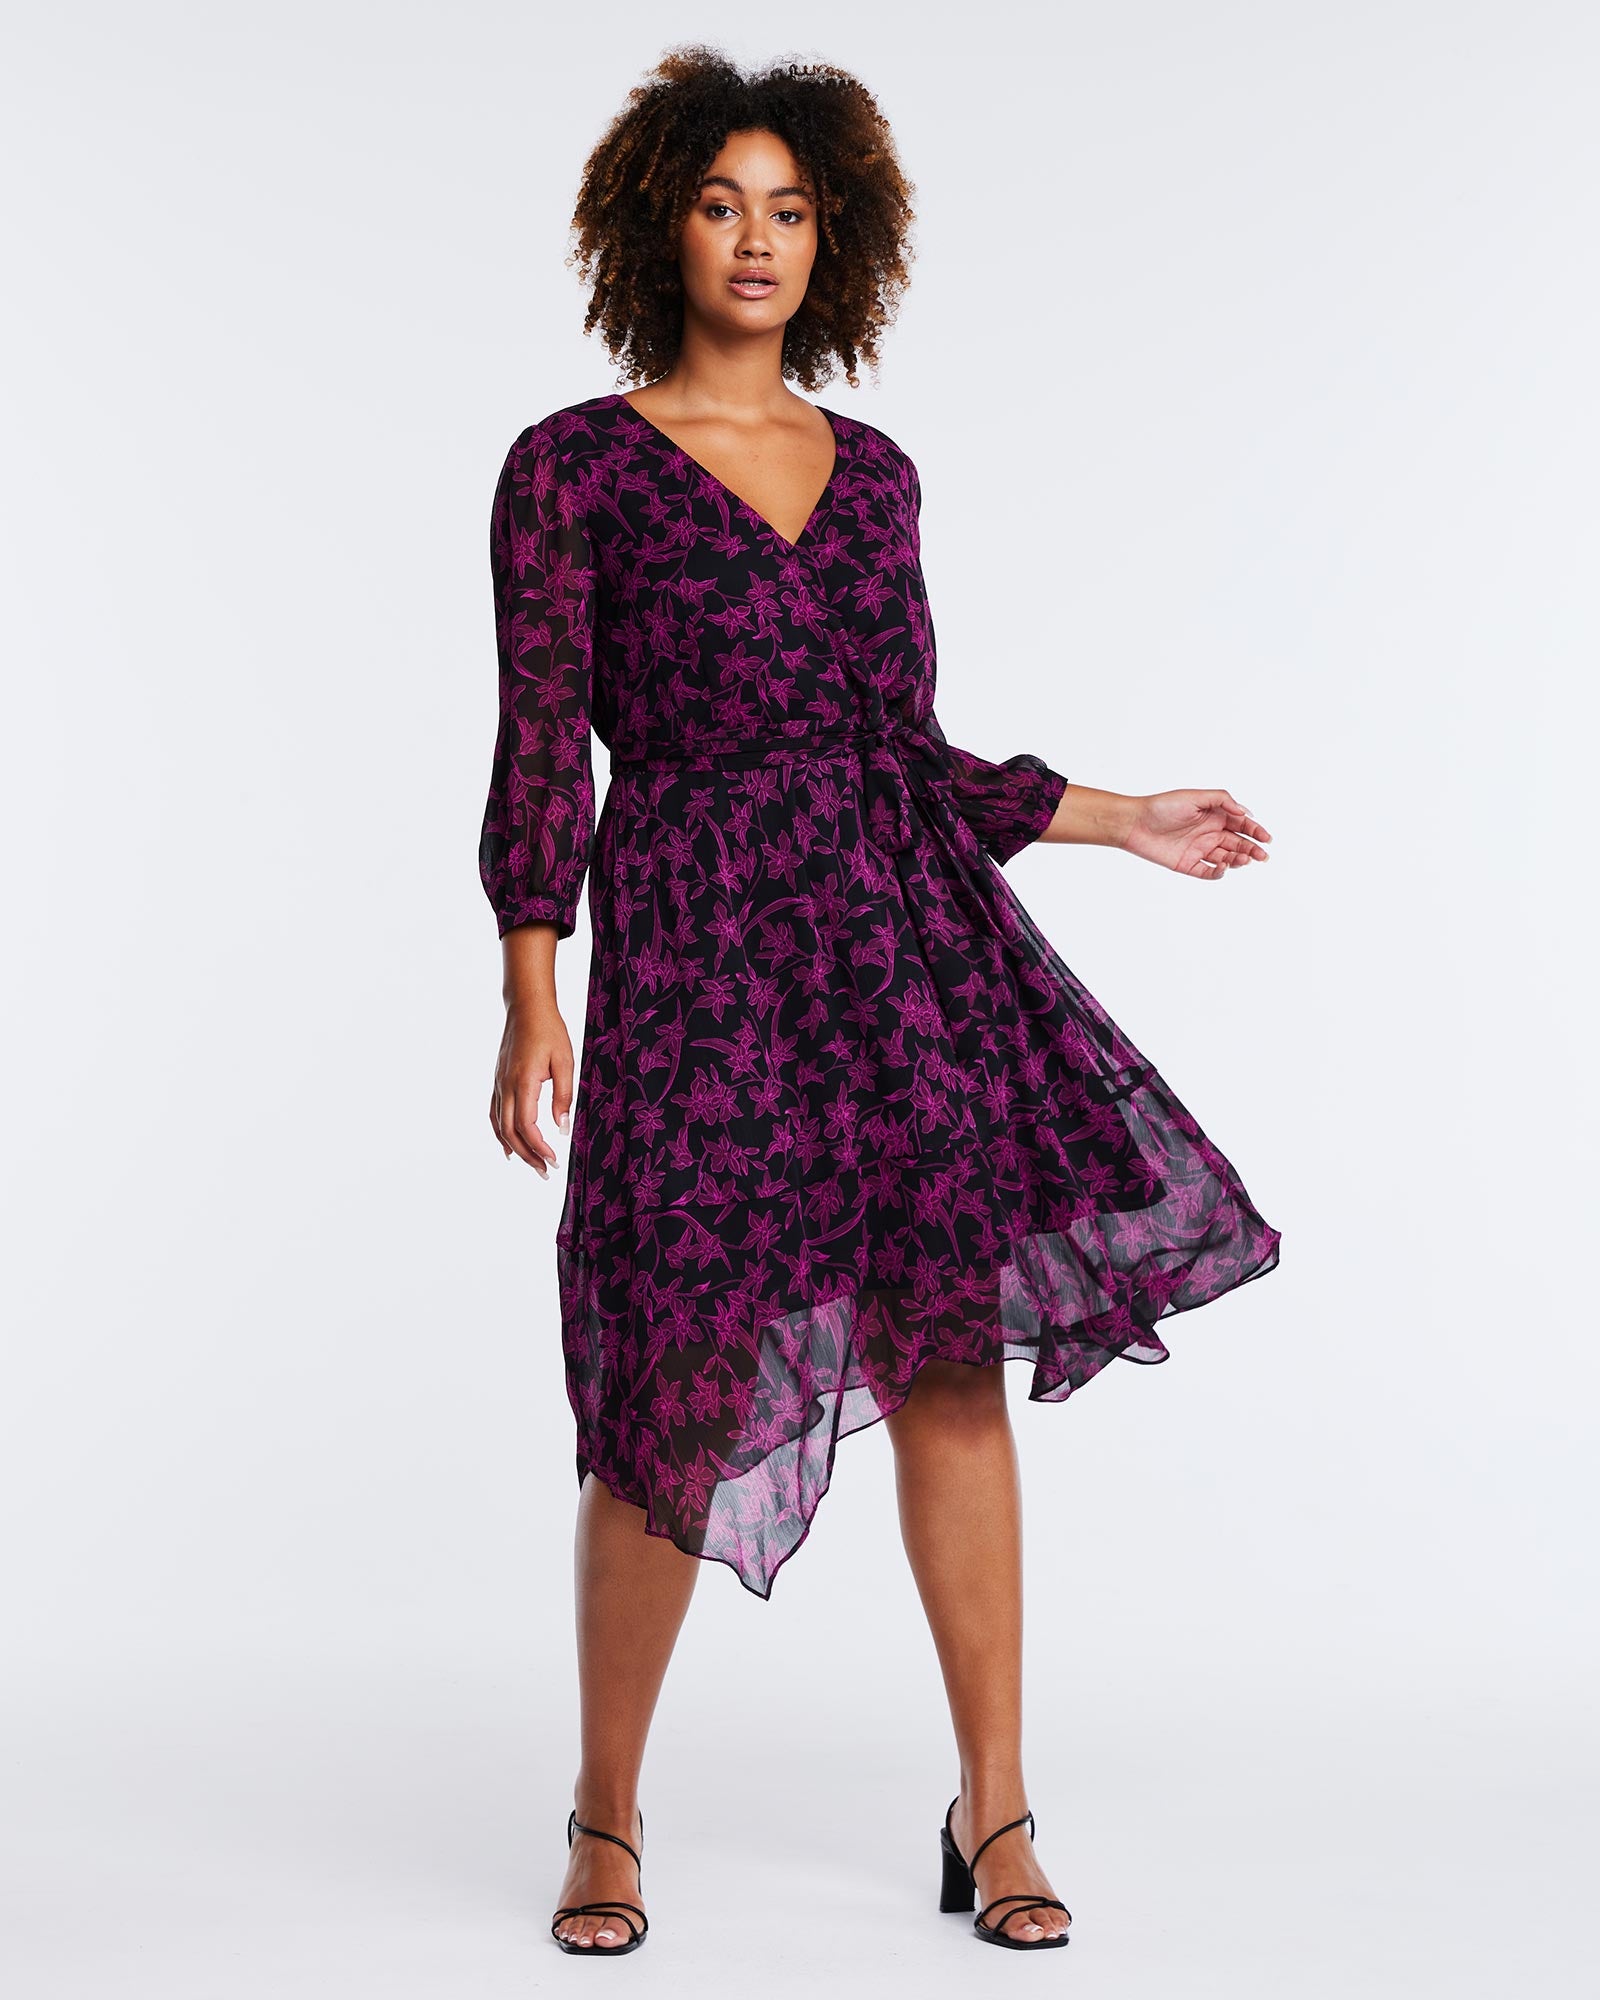 The model is wearing a comfortable and elegant Boysenberry Bloom Black Pink Floral midi dress with a v-neck.